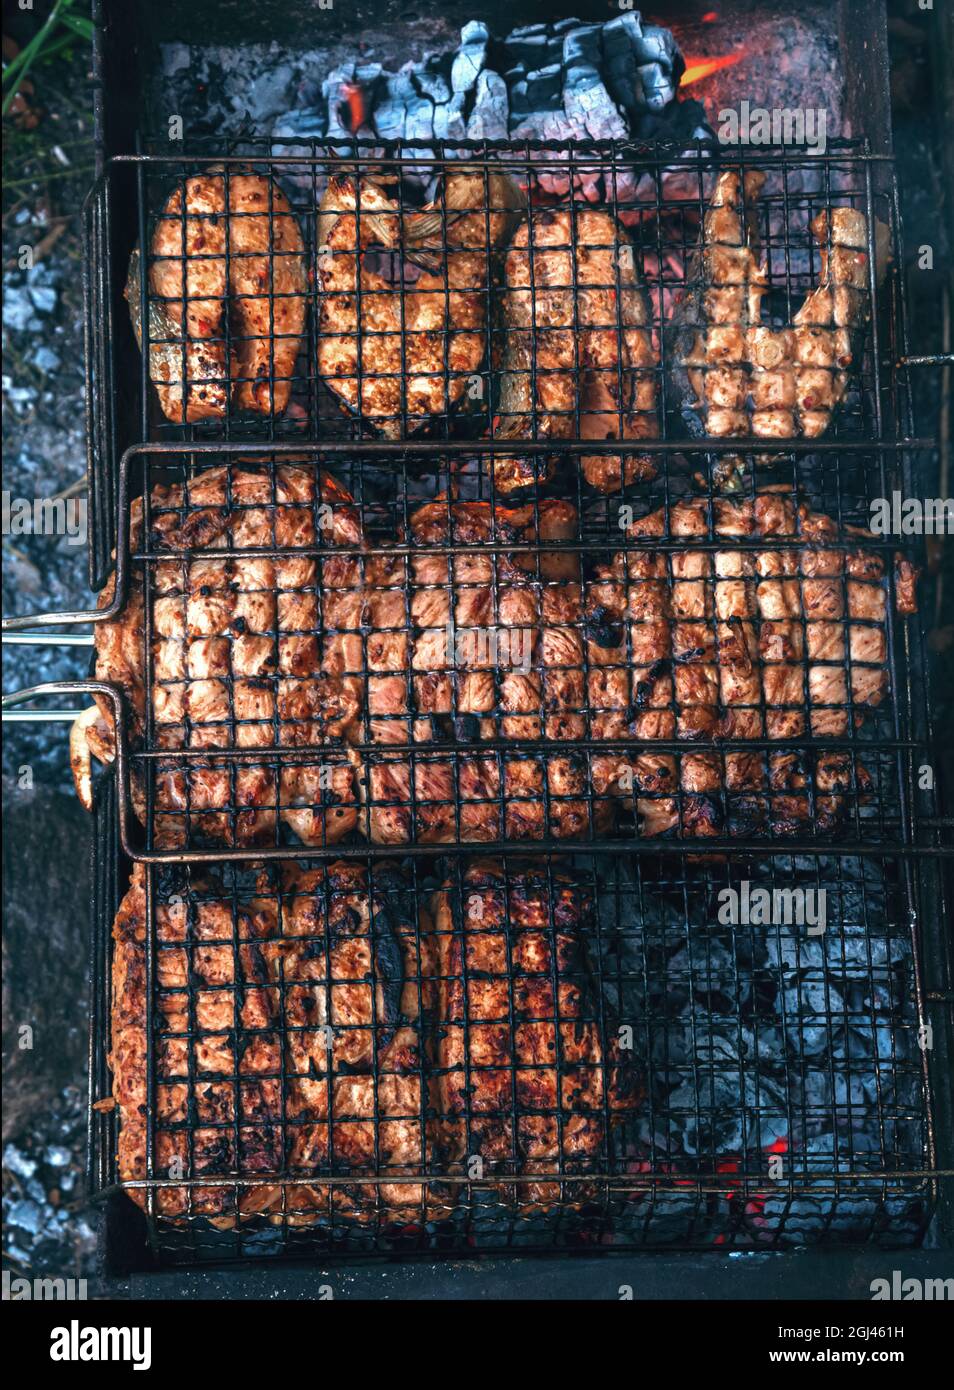 Steaks of red fish and pork chops, enveloped in light smoke, are cooked on hot coals on the grill. Vertical photo. Stock Photo